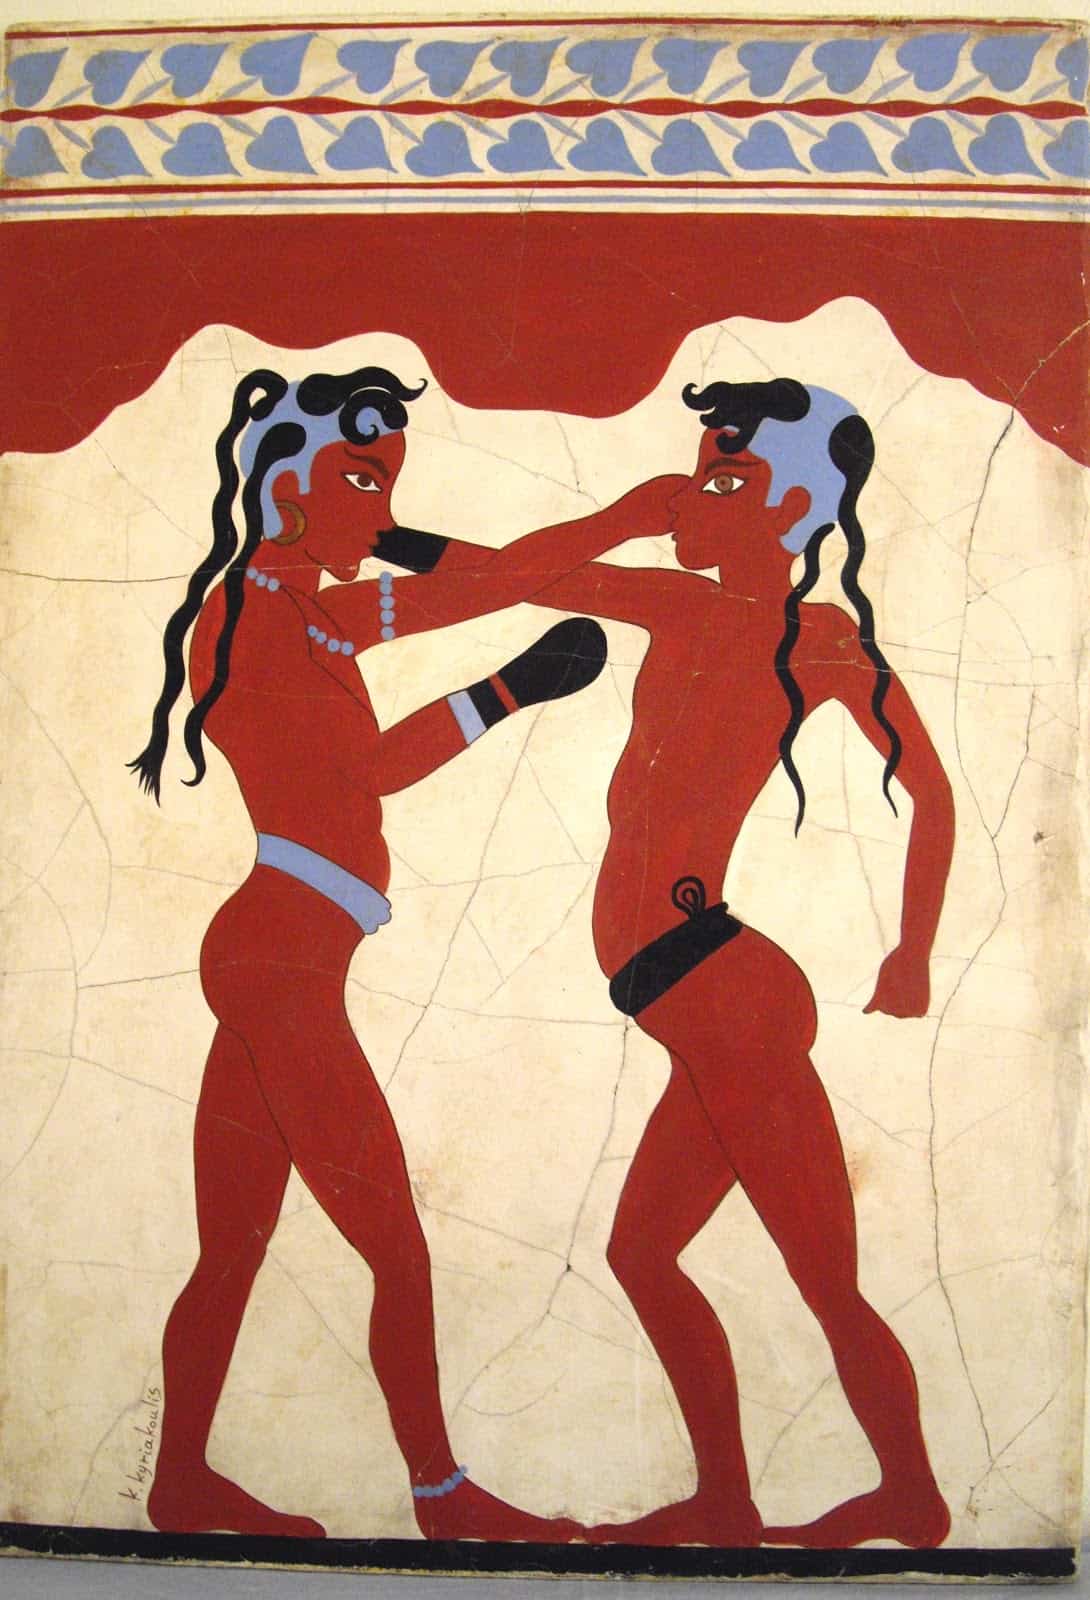 santorini young boxers ancient mural athens 2004 olympic games